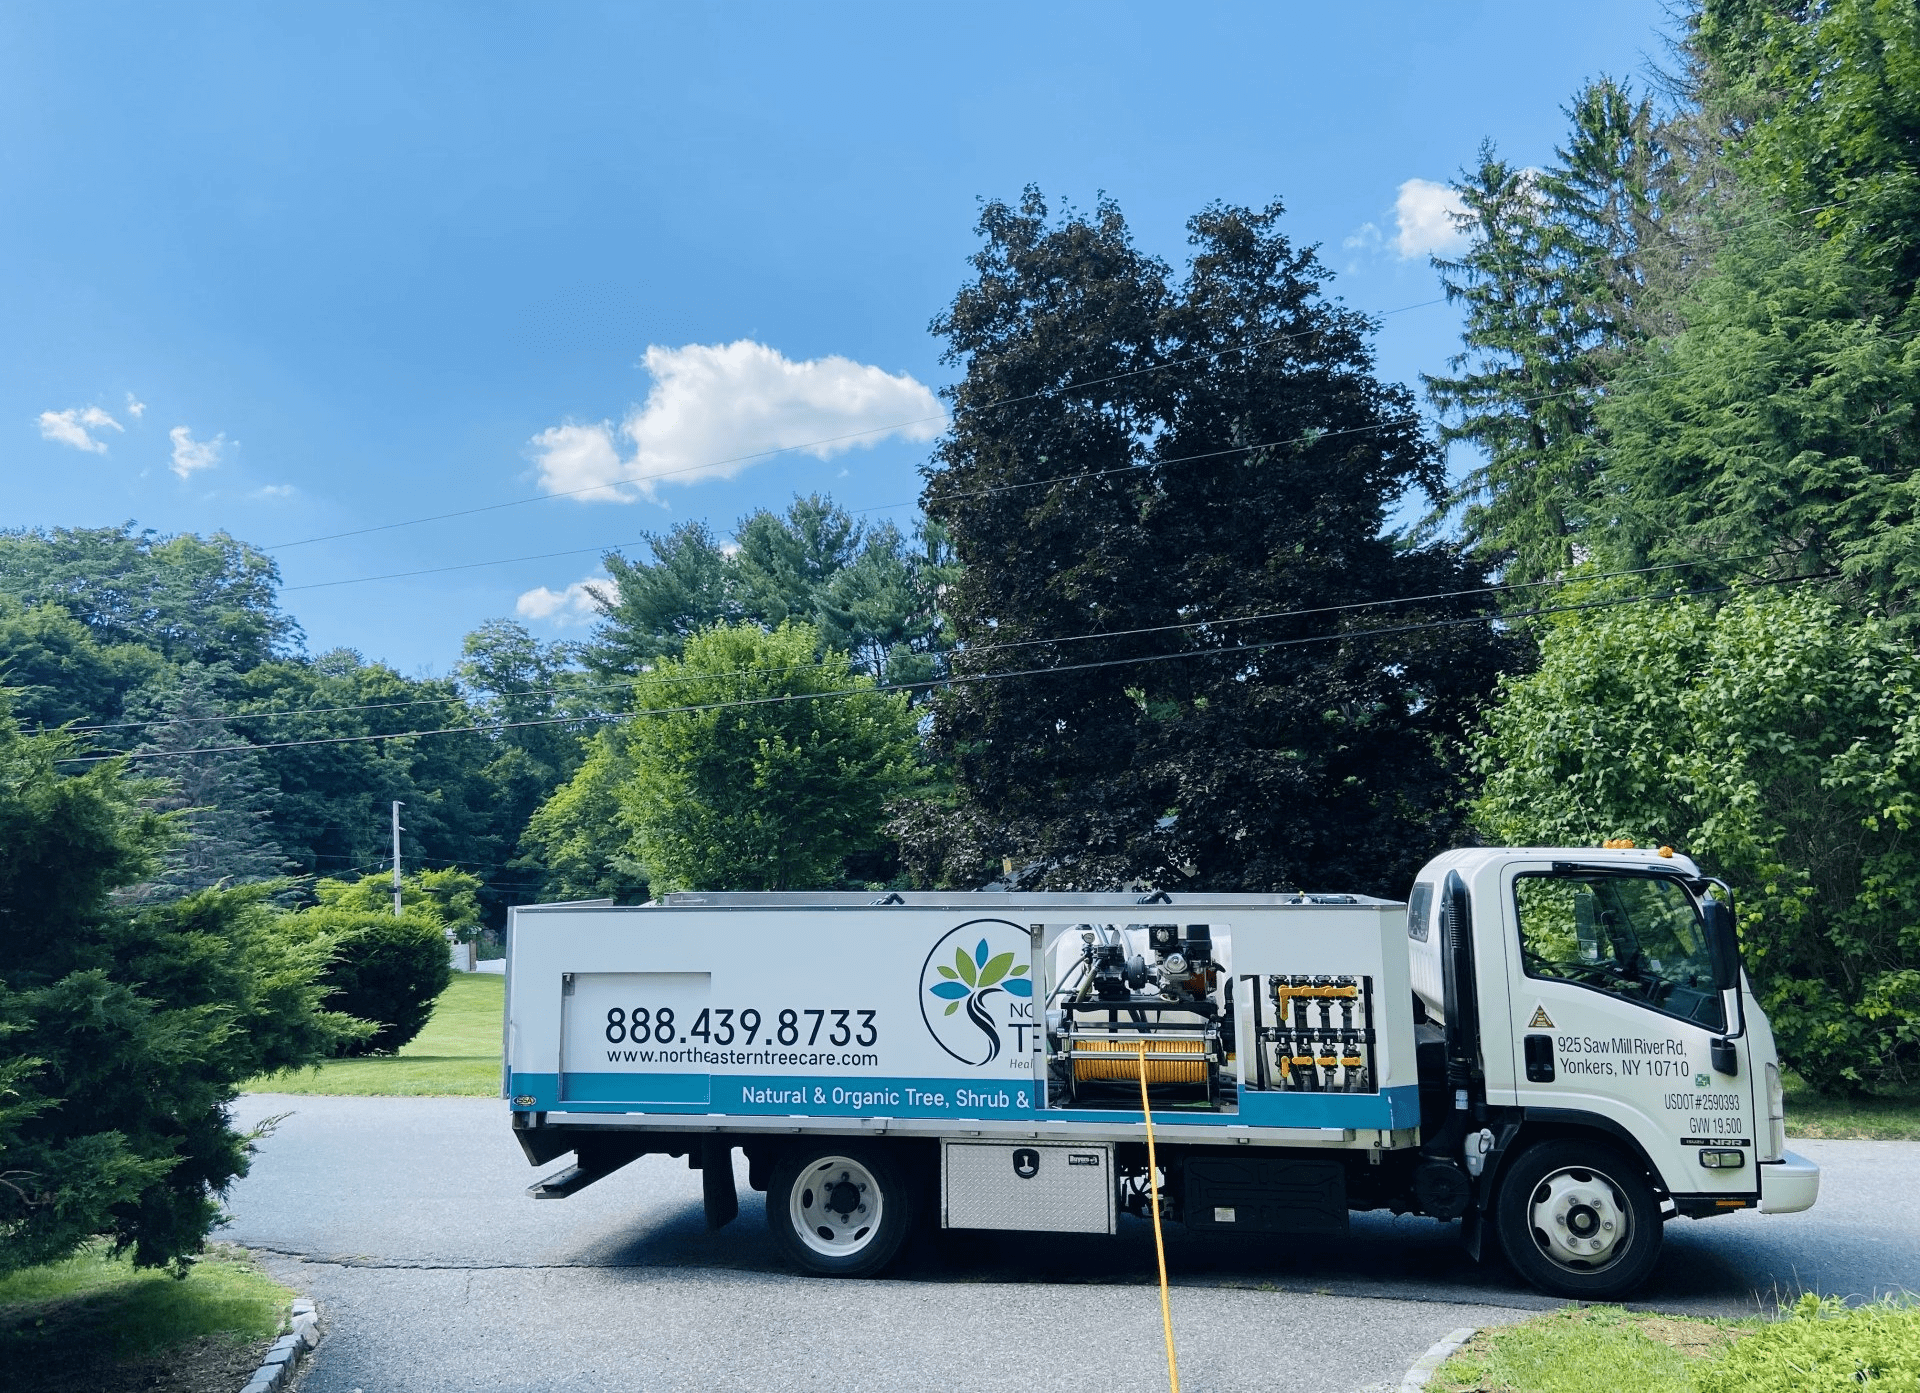 tree care in yonkers ny            |    https://northeasterntreecare.com/wp-content/uploads/IMG_0004-bbe20515-1920w.png